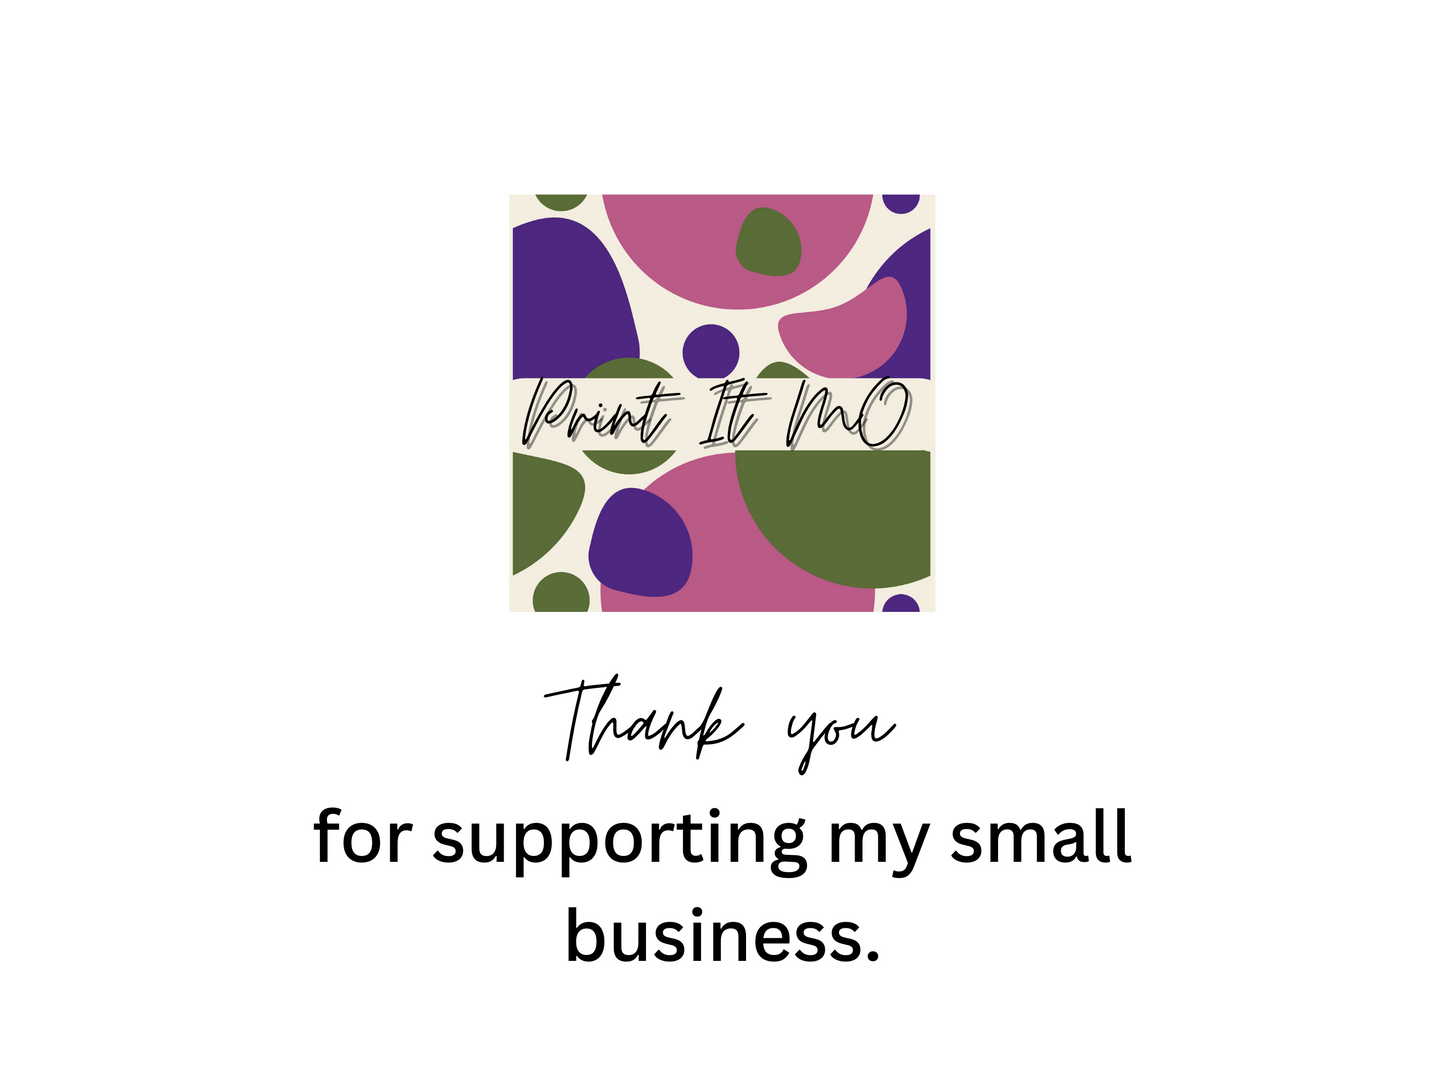 Print It Mo logo and a thank you message.